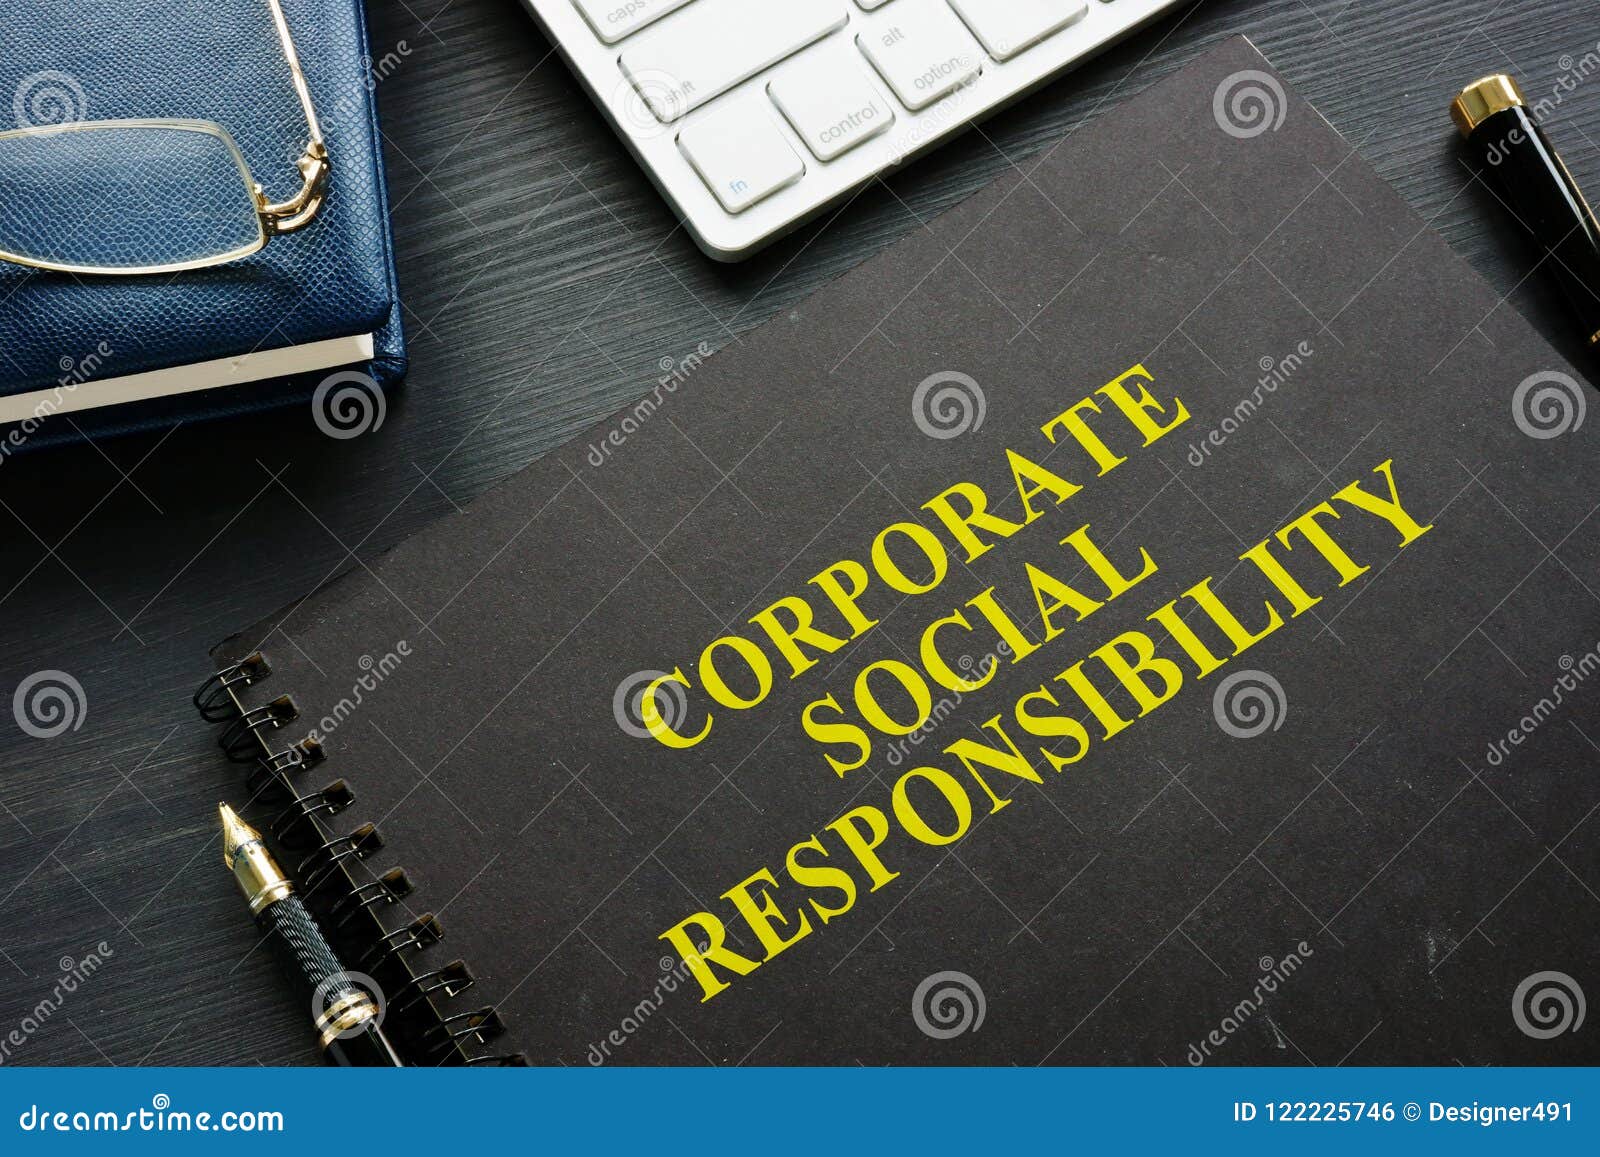 book about corporate social responsibility.